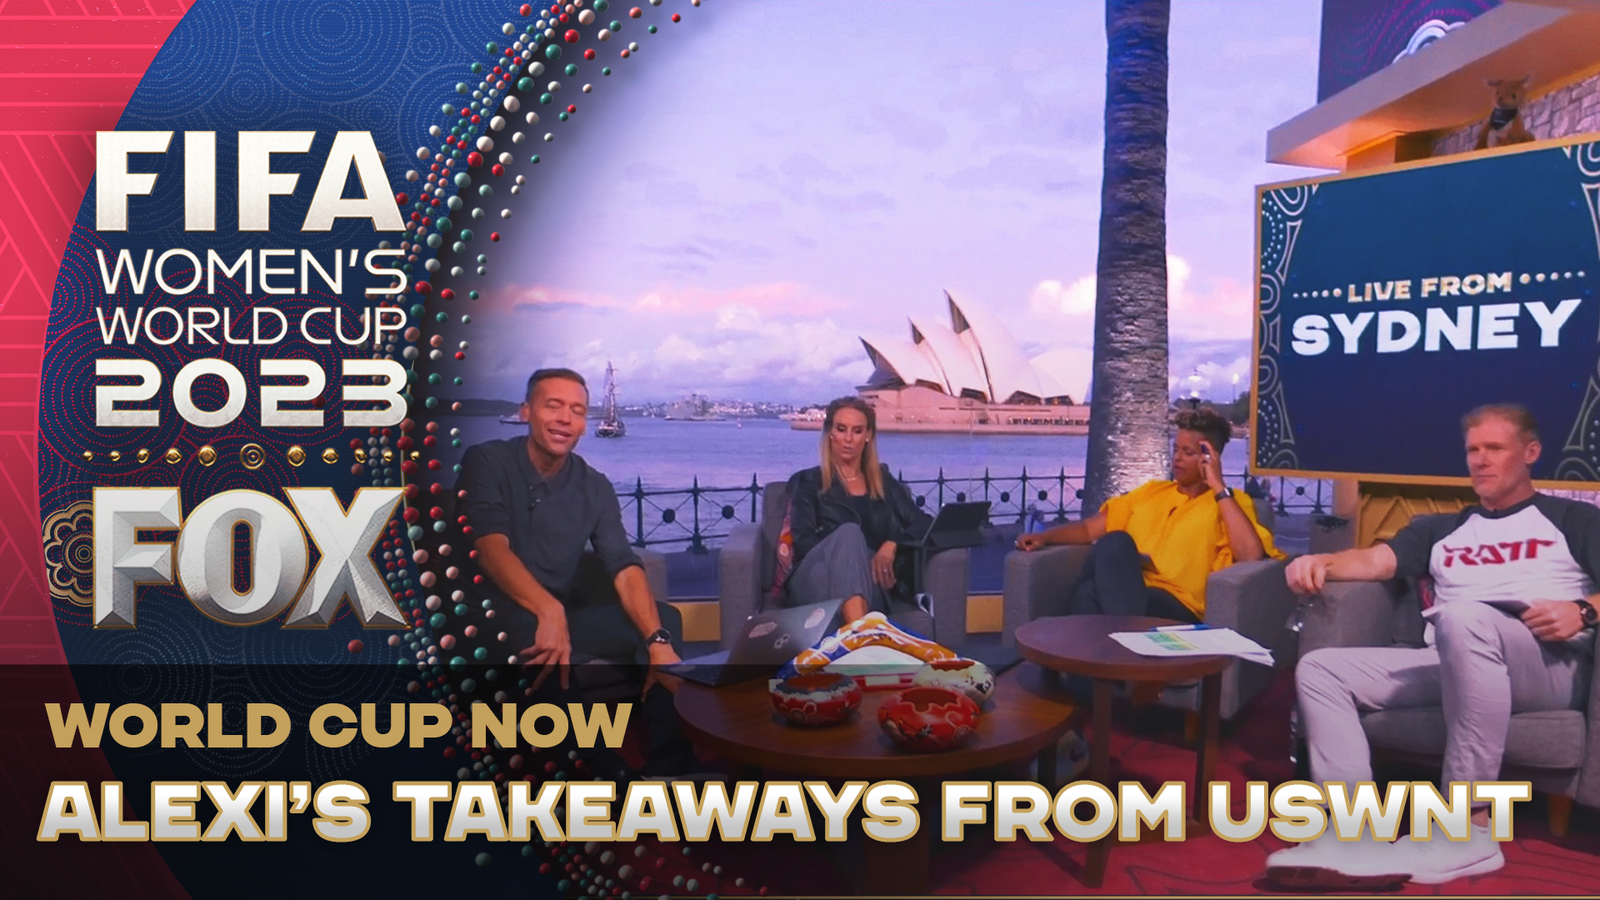 Alexi Lalas joins "World Cup NOW" to give his takeaways from the USWNT's win over Vietnam